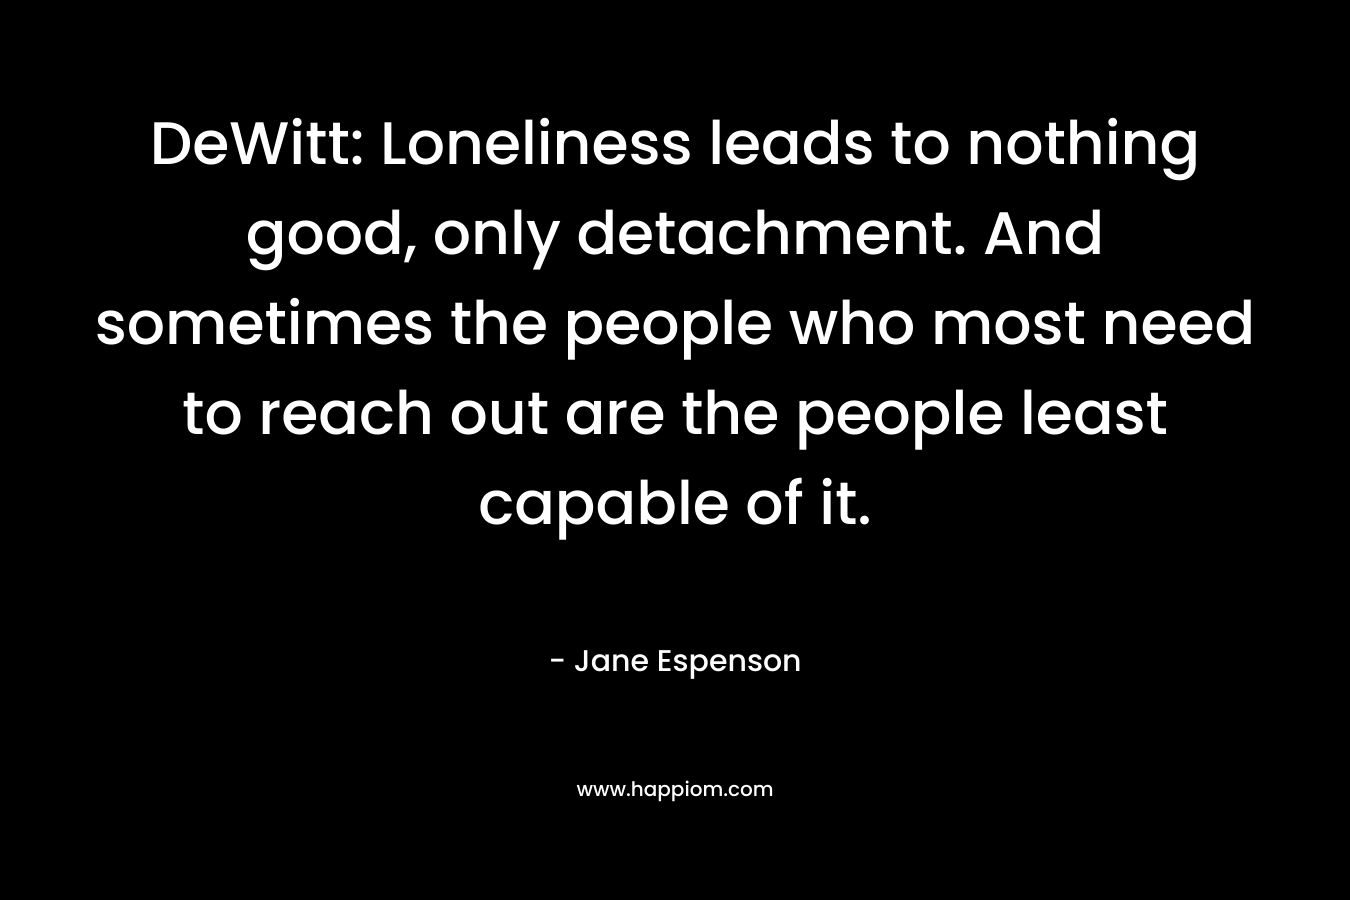 DeWitt: Loneliness leads to nothing good, only detachment. And sometimes the people who most need to reach out are the people least capable of it. – Jane Espenson